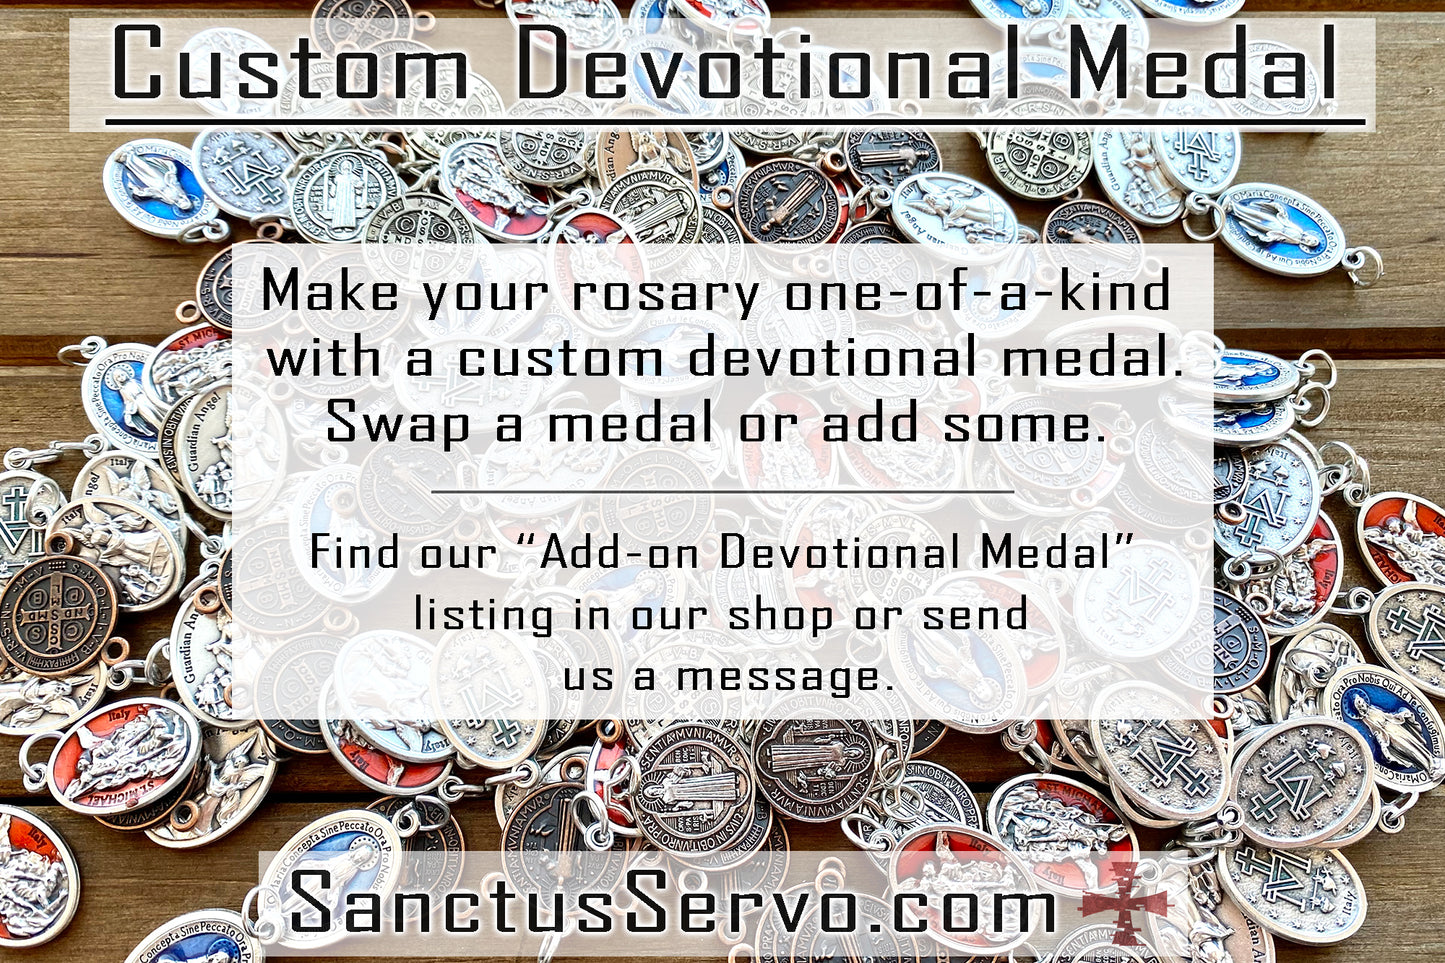 A custom devotional medal can be added to any rosary purchased from SanctusServo.com.